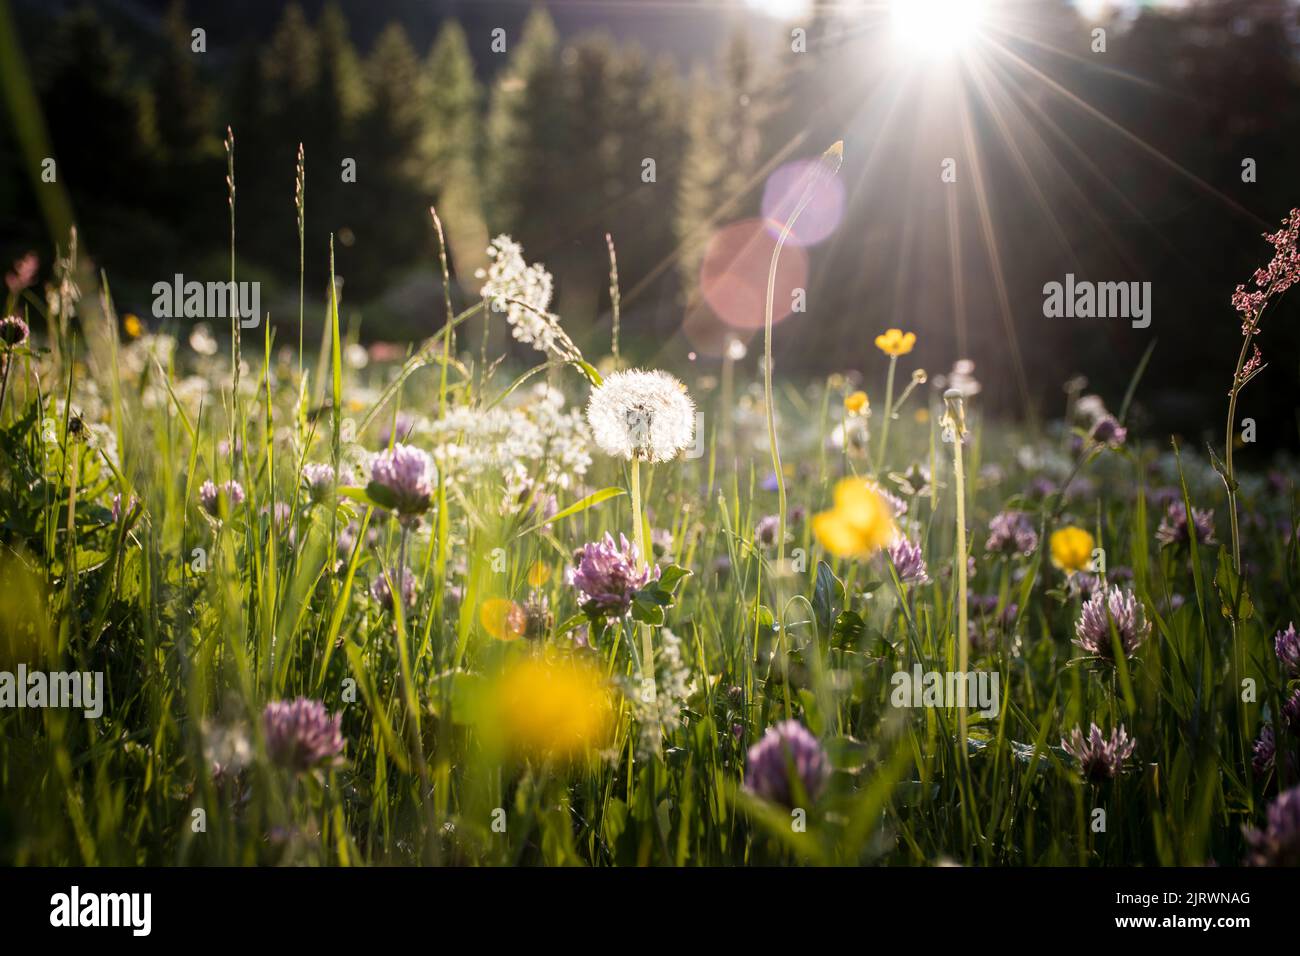 Evening light shines through a dandelion seedhead in a meadow of flowers Stock Photo